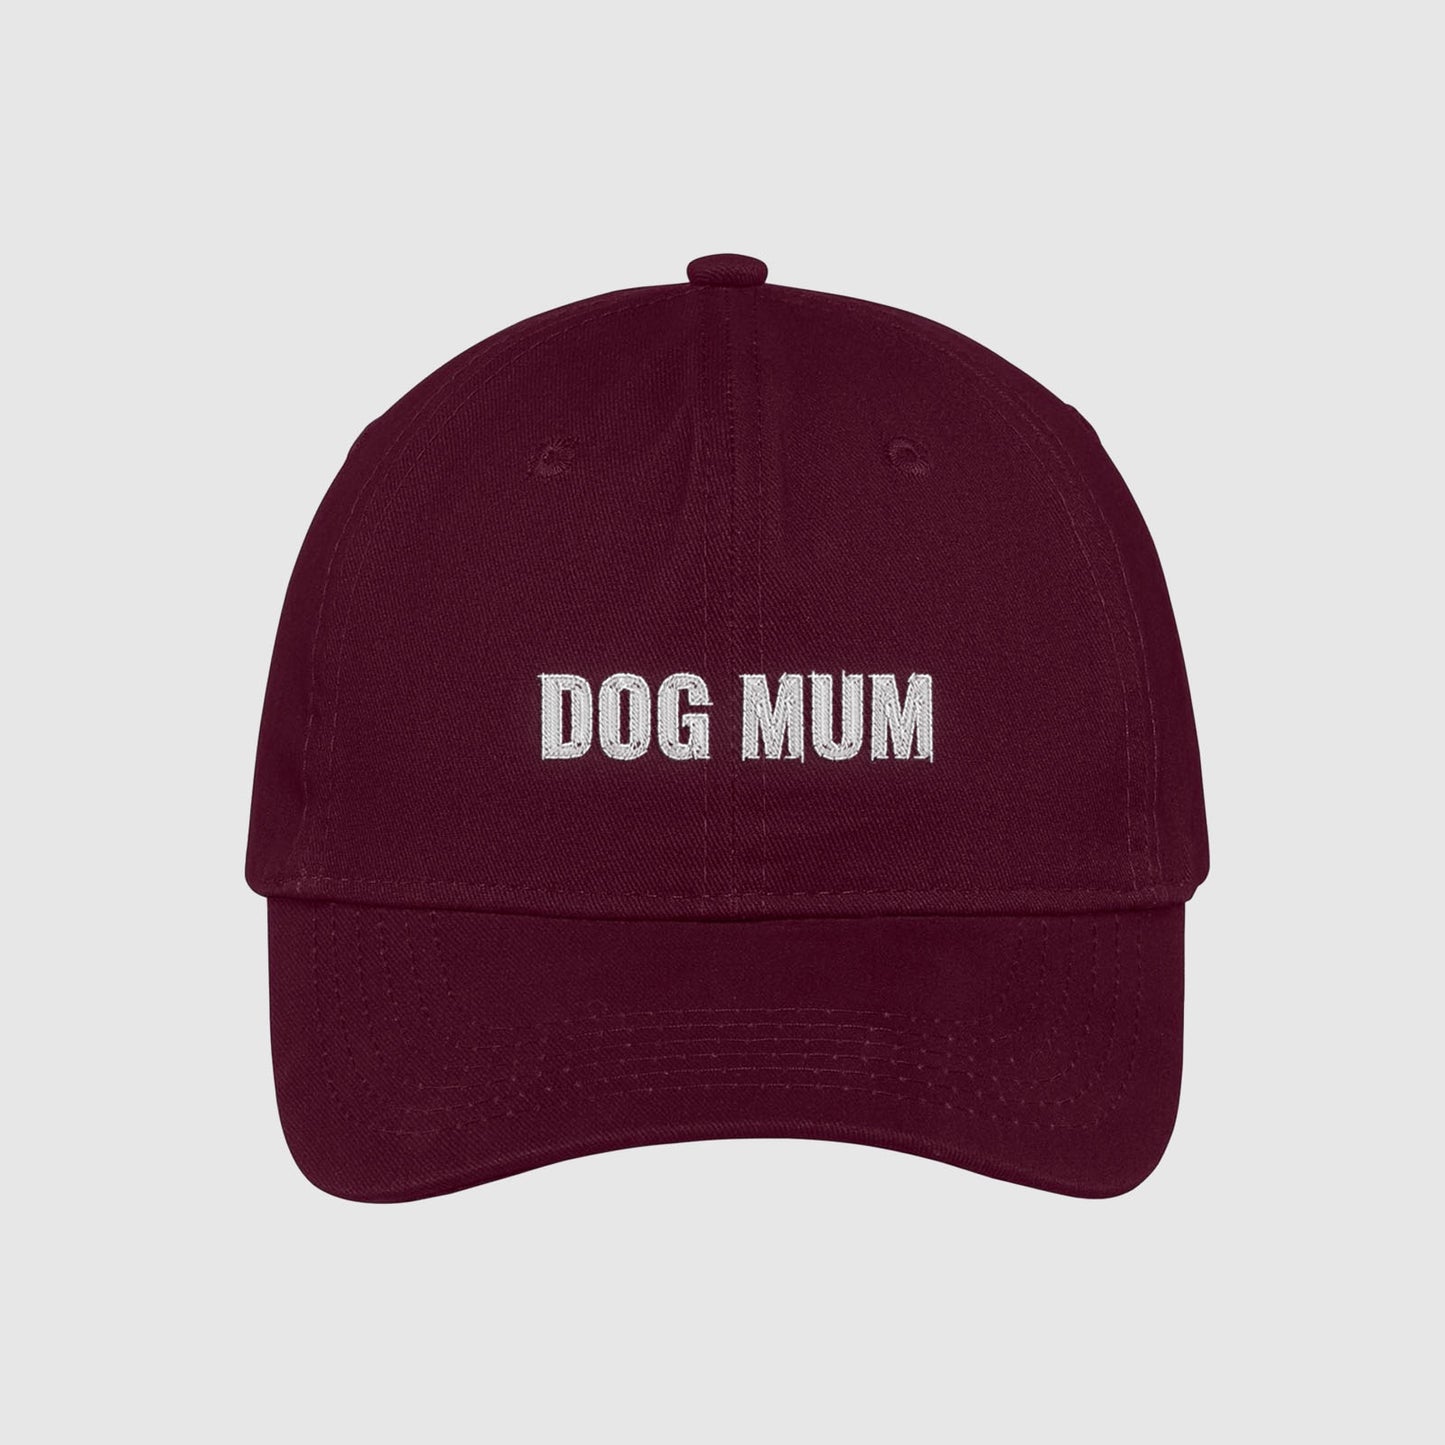 Maroon Dog Mum Hat embroidered with white text.